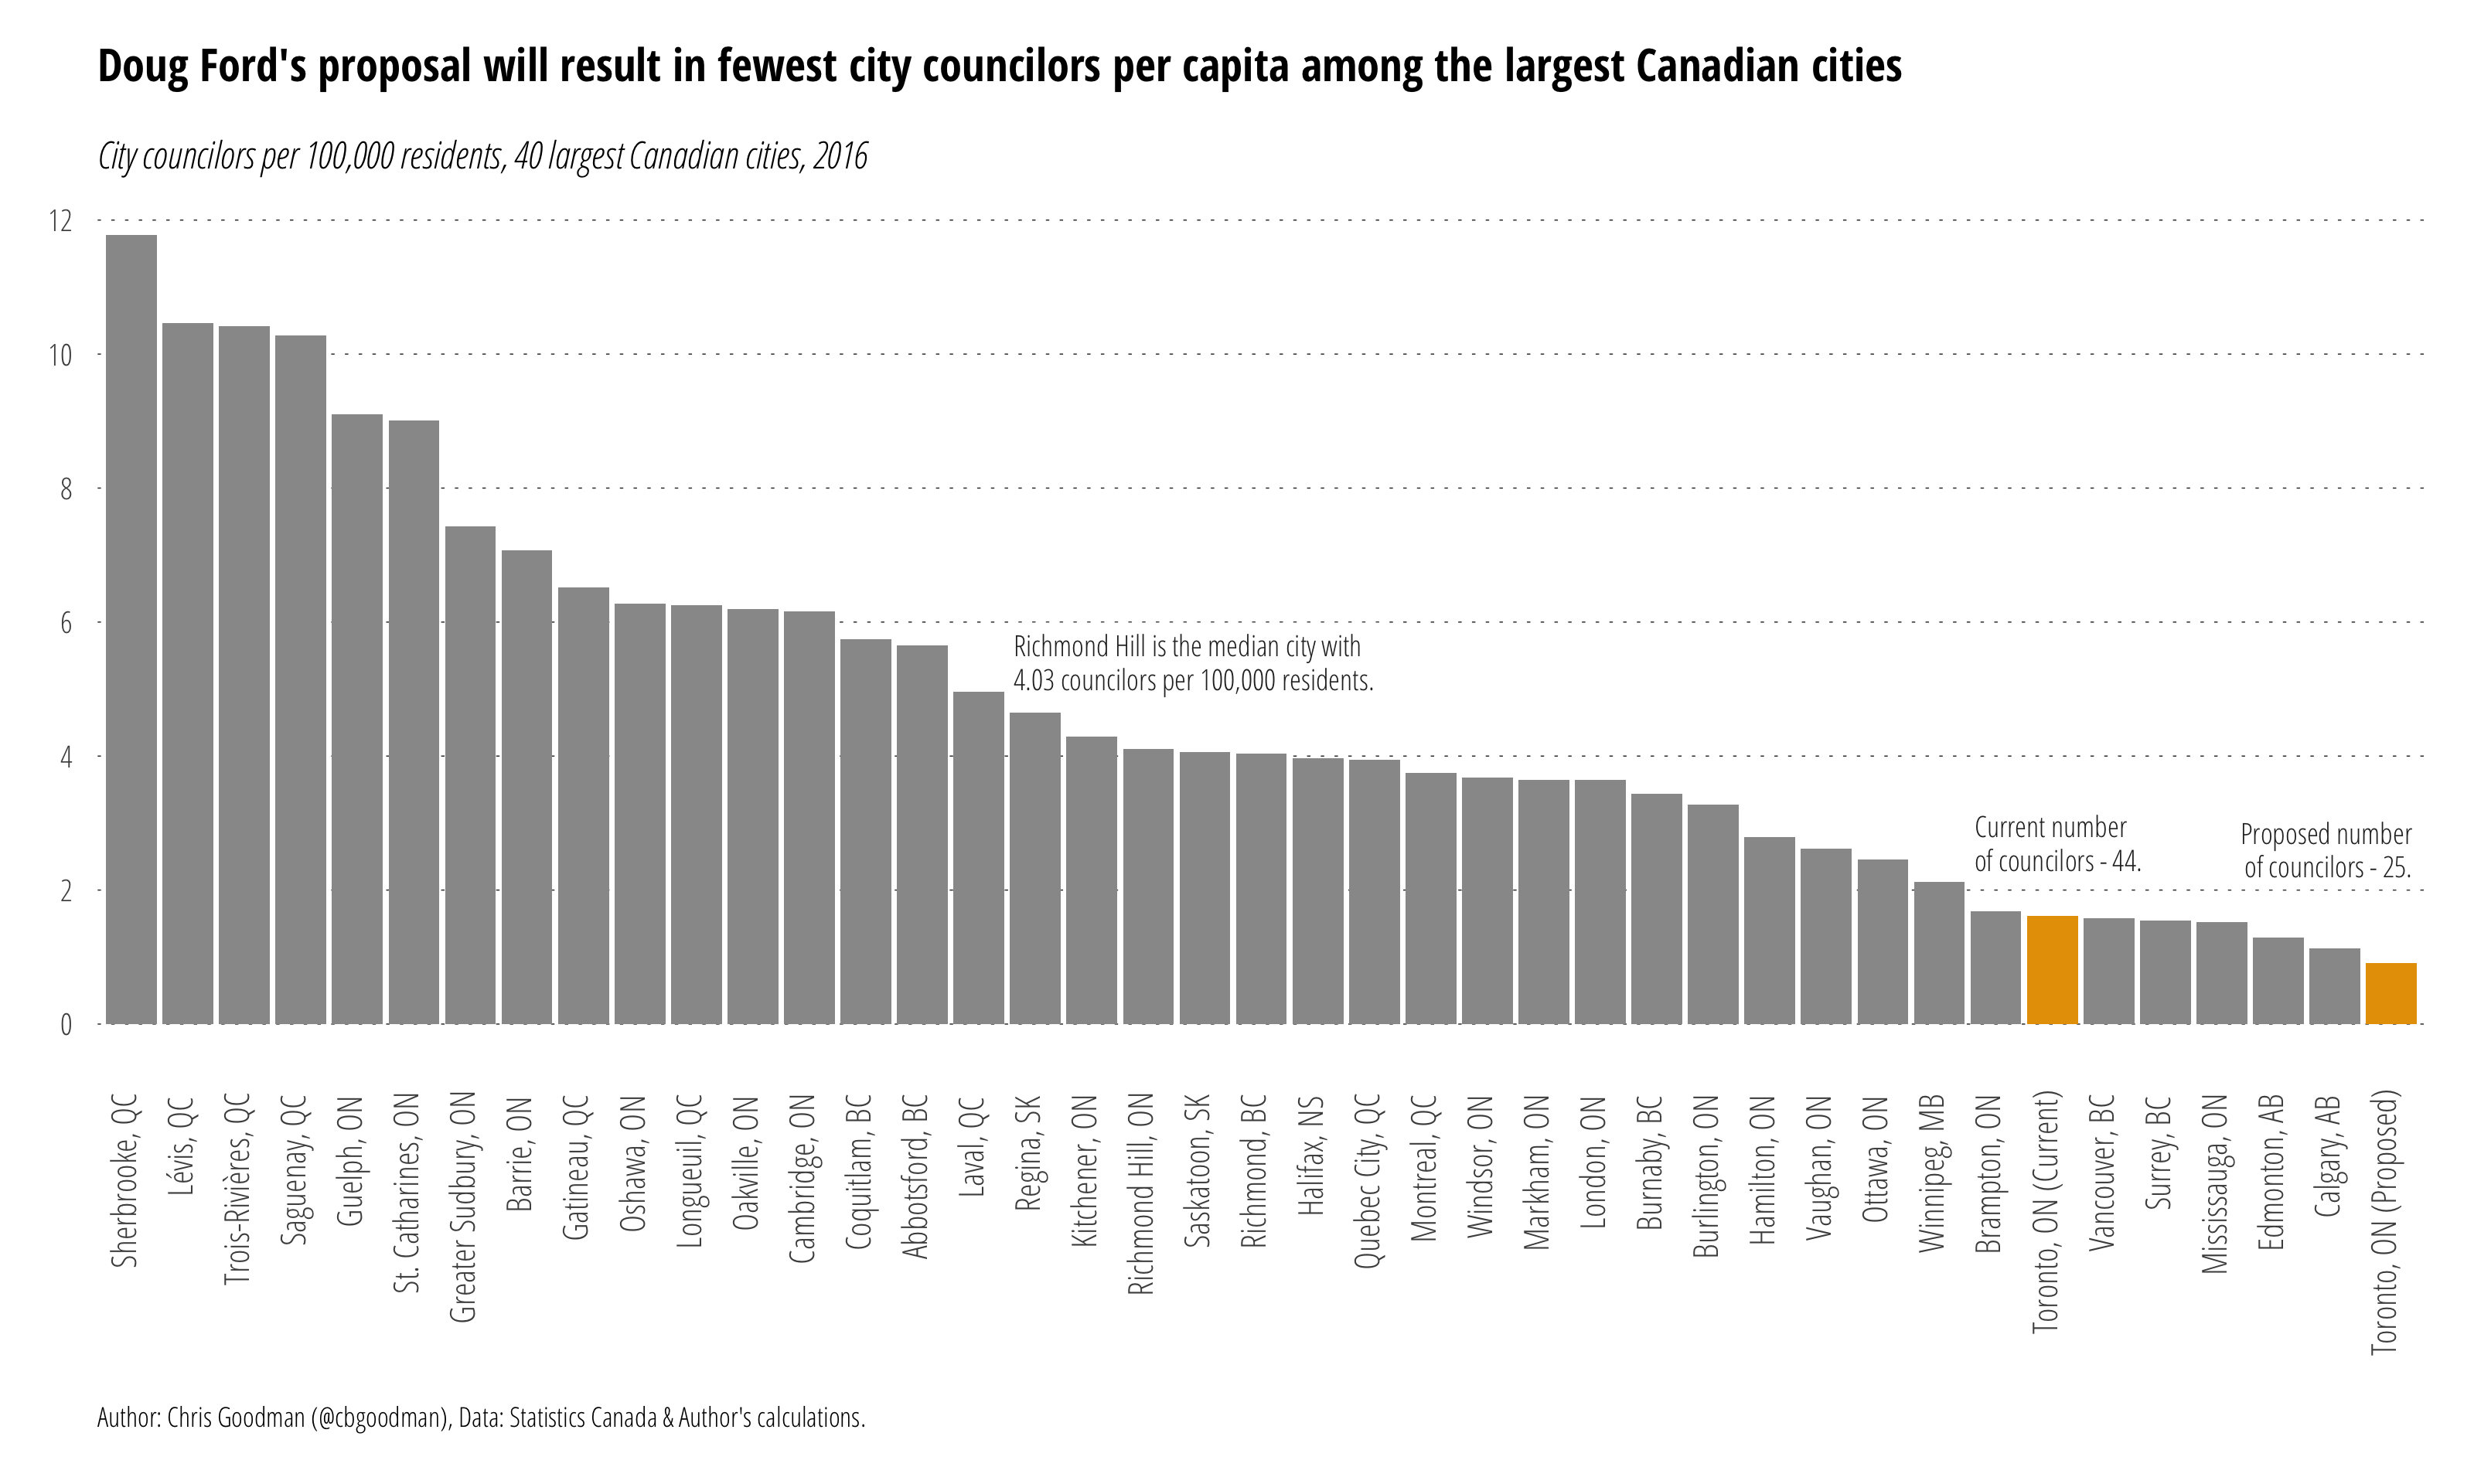 Canadian City Councilors per 100,000 Residents